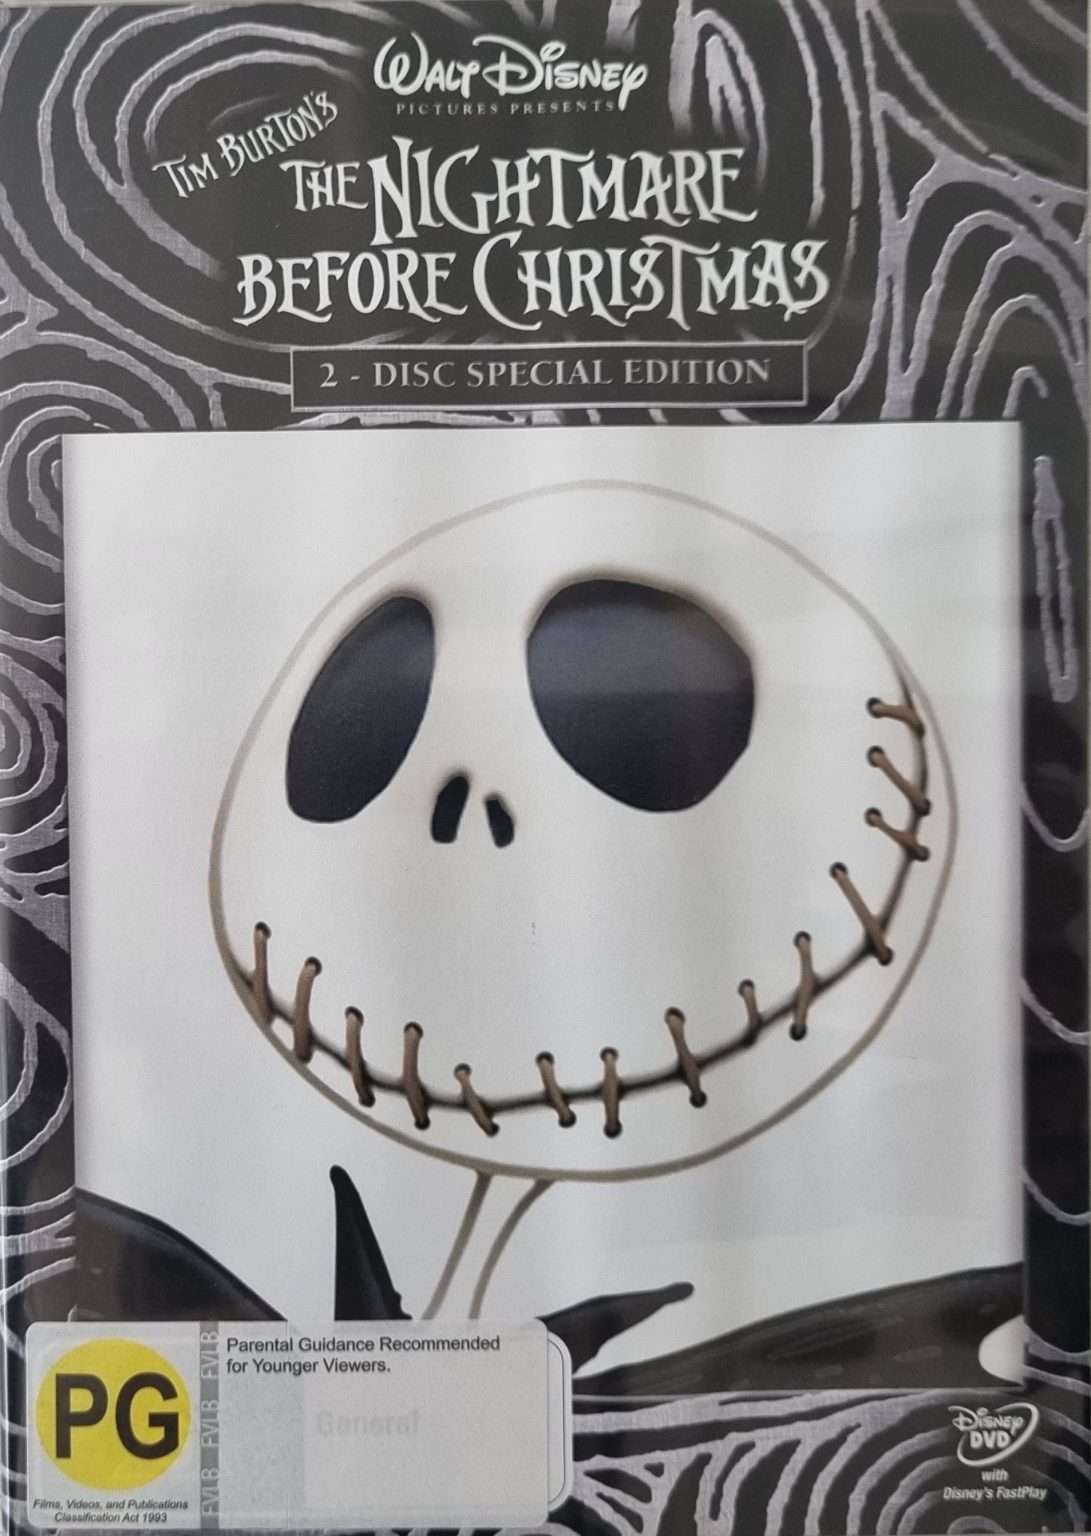 The Nightmare Before Christmas 2 Disc Special Edition